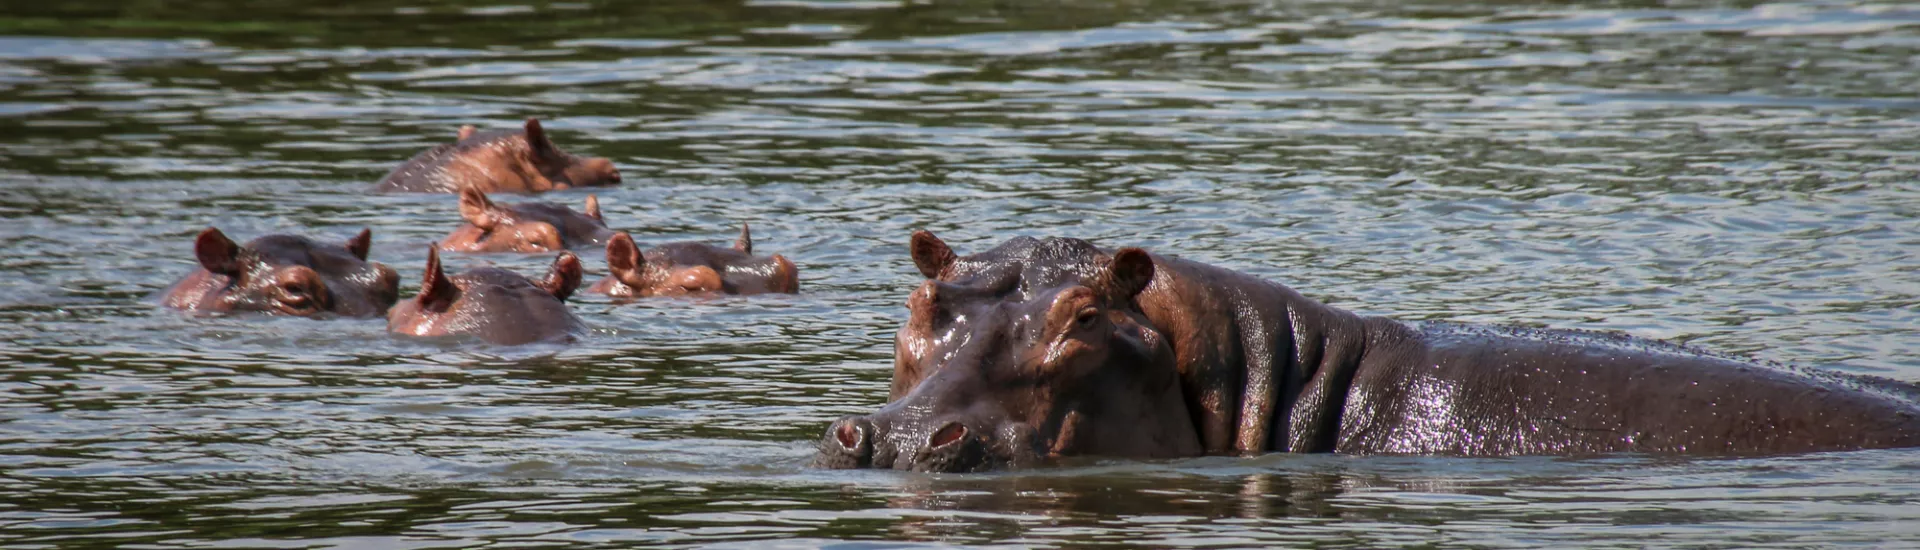 hippos in a river